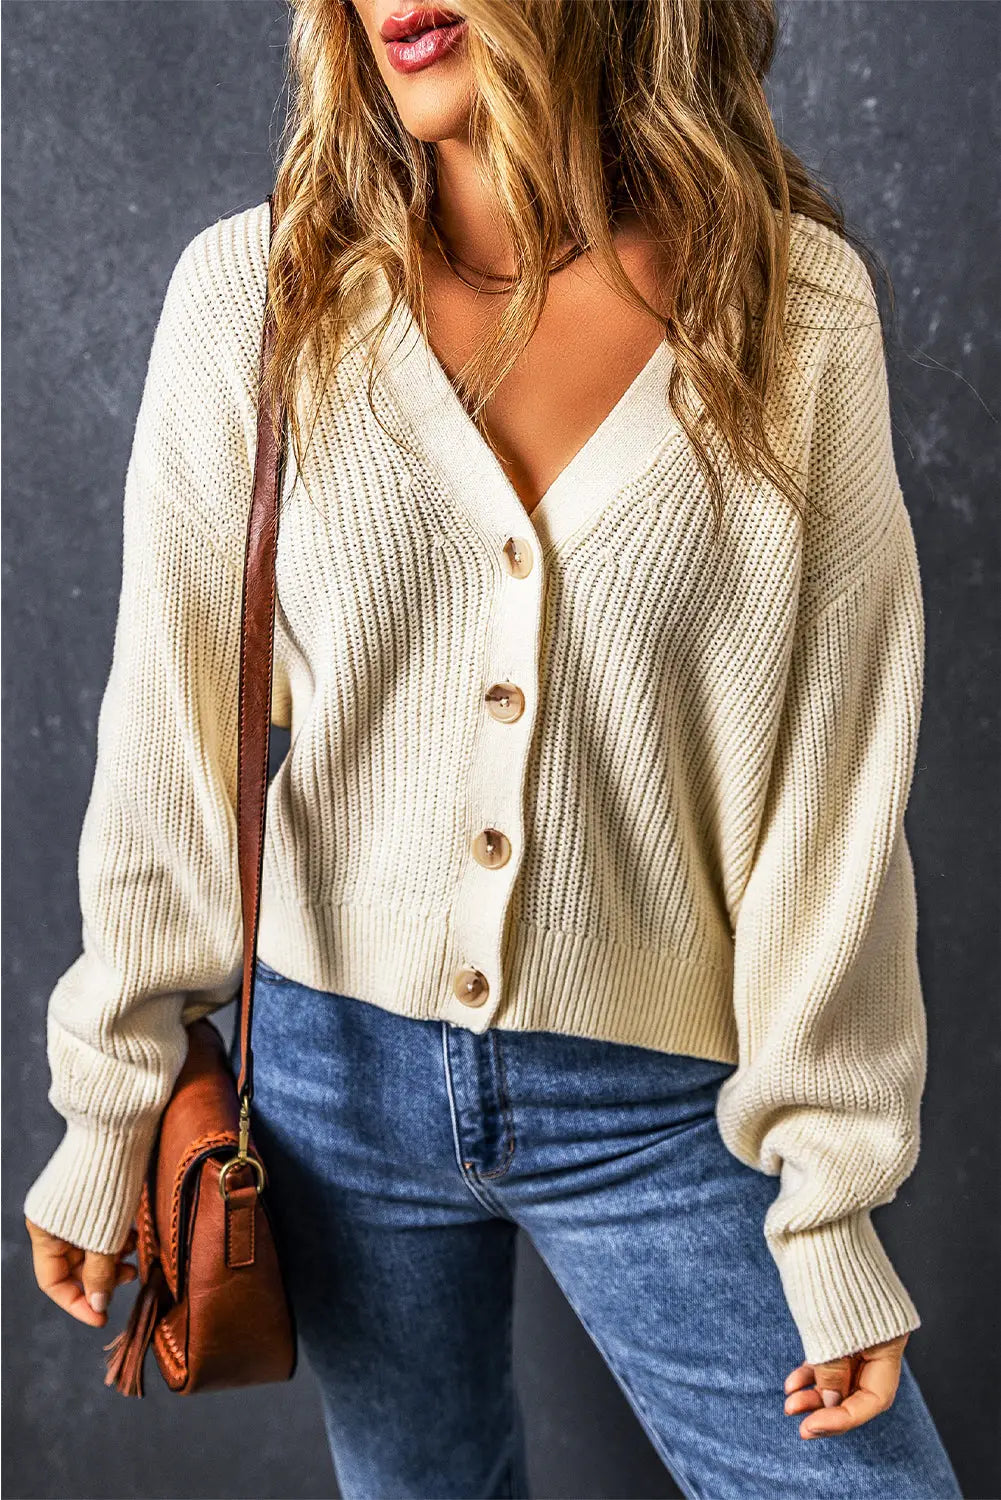 Beige plain knitted buttoned v neck cardigan - s 60% cotton + 40% acrylic sweaters & cardigans